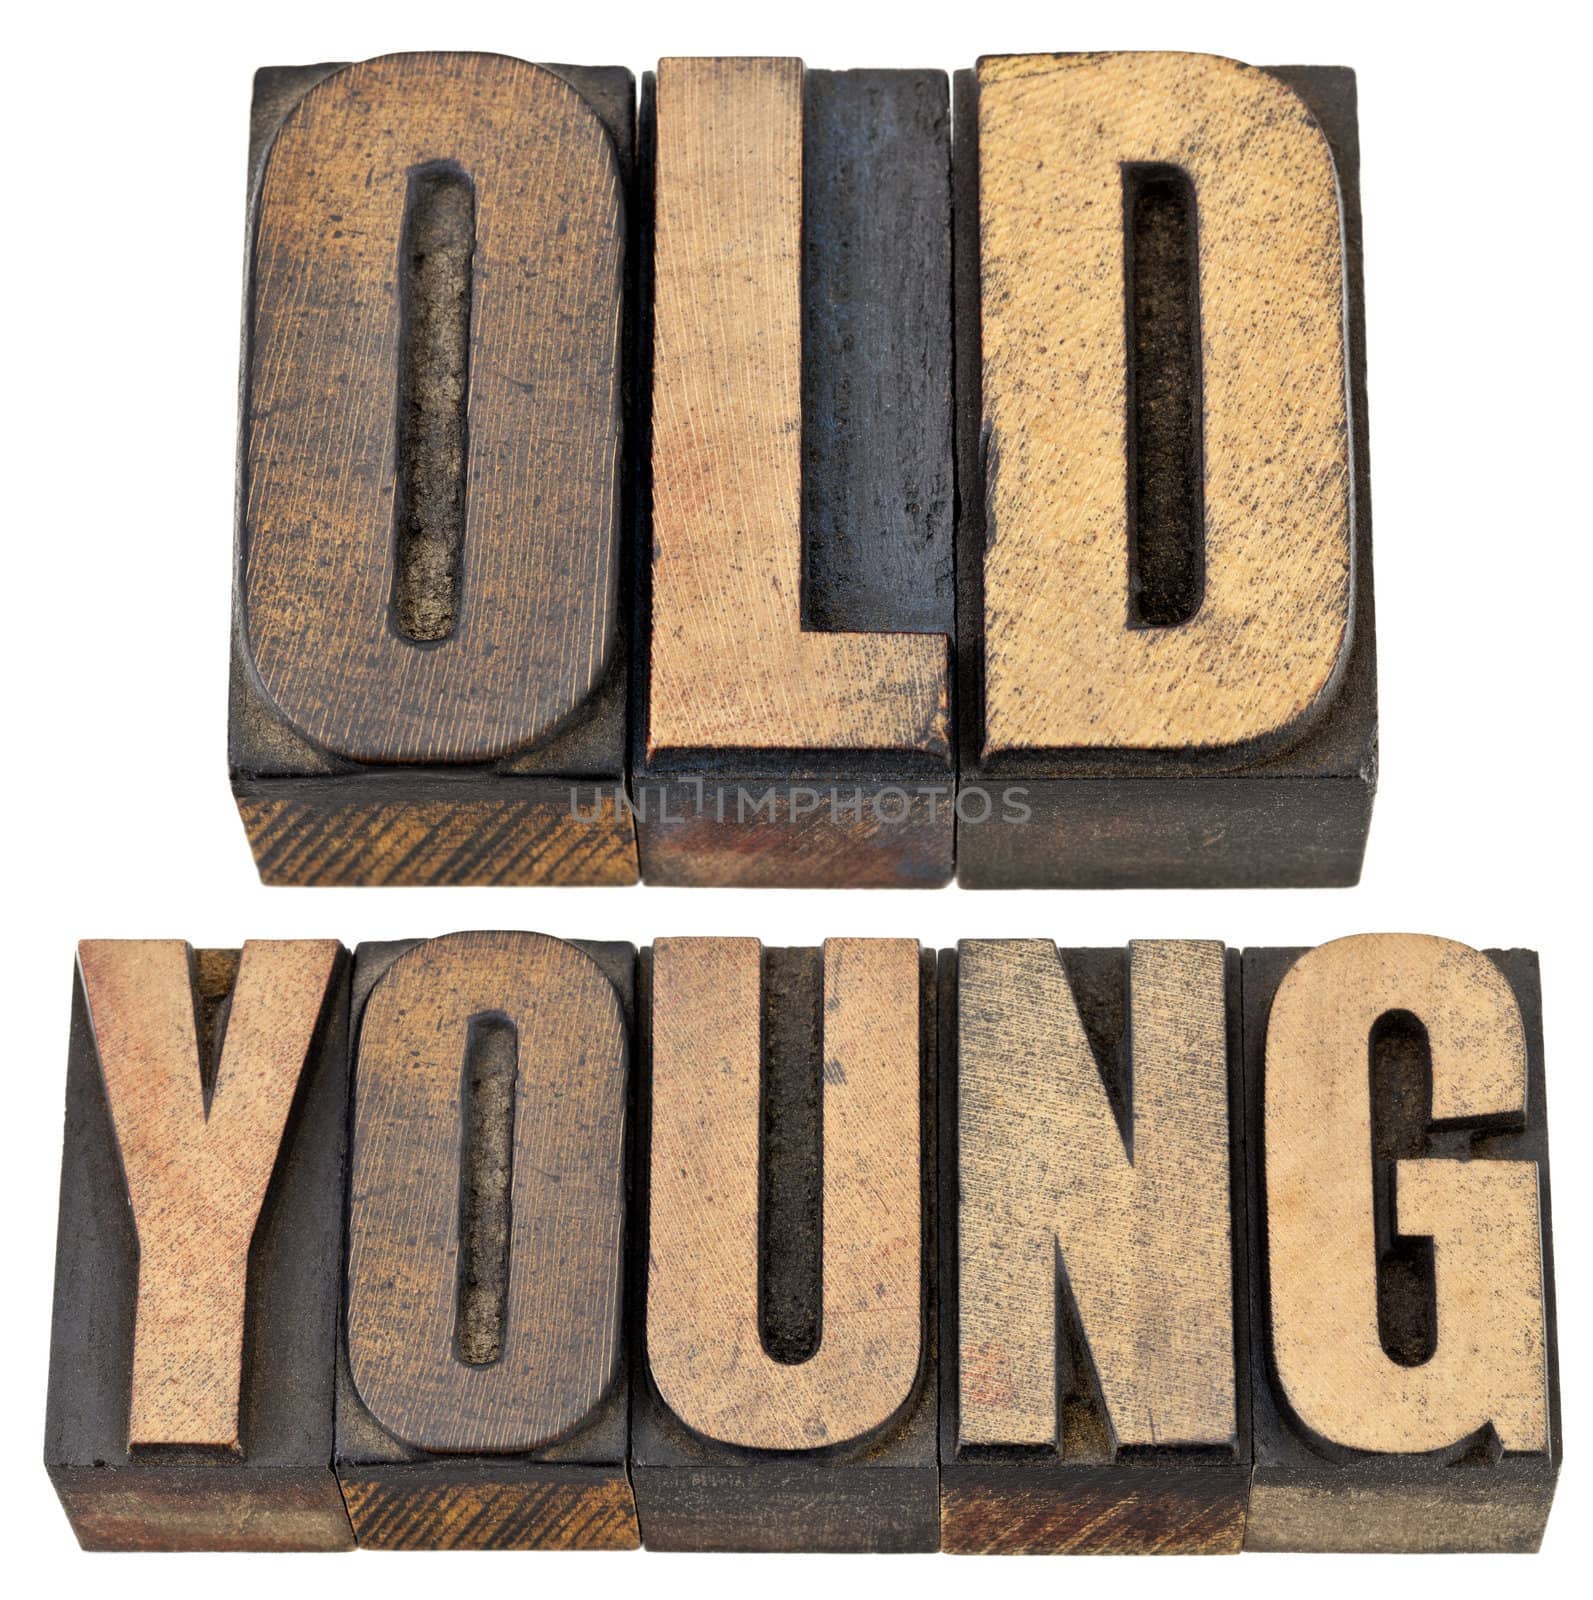 old and young in letterpress wood type by PixelsAway